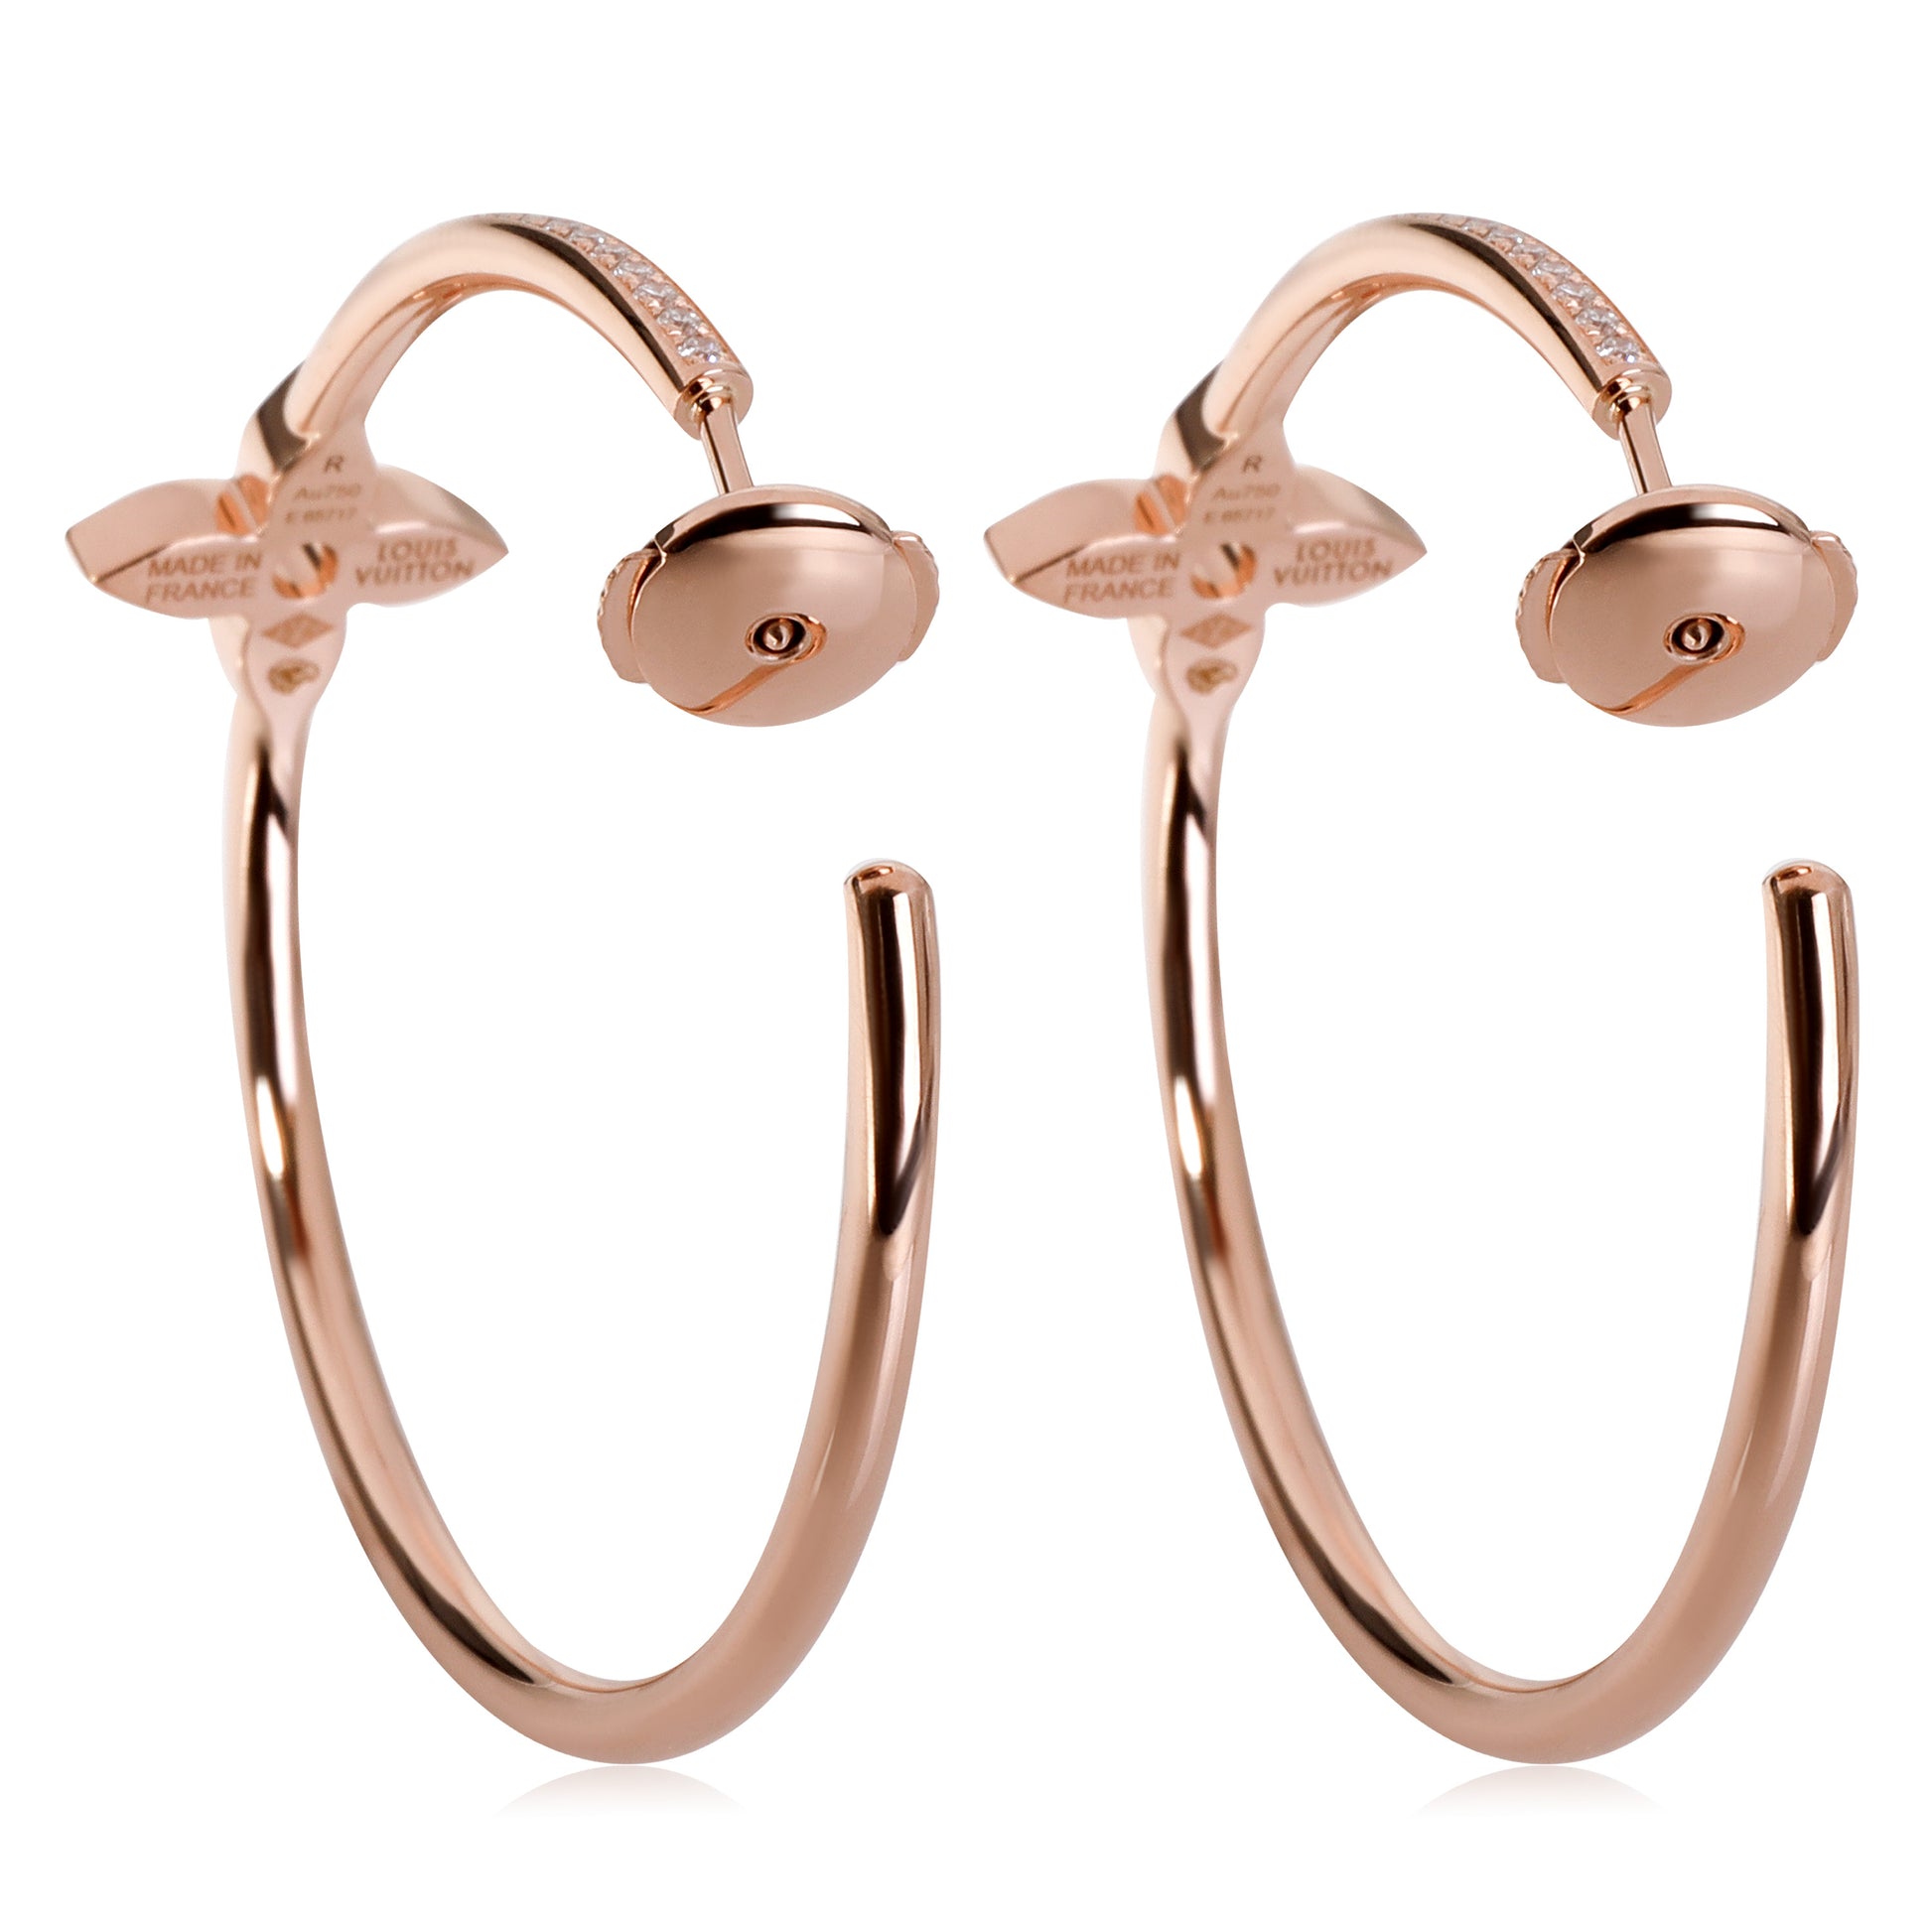 Louis Vuitton Idylle Blossom Right Earring, Pink Gold and Diamonds - per Unit. Size NSA